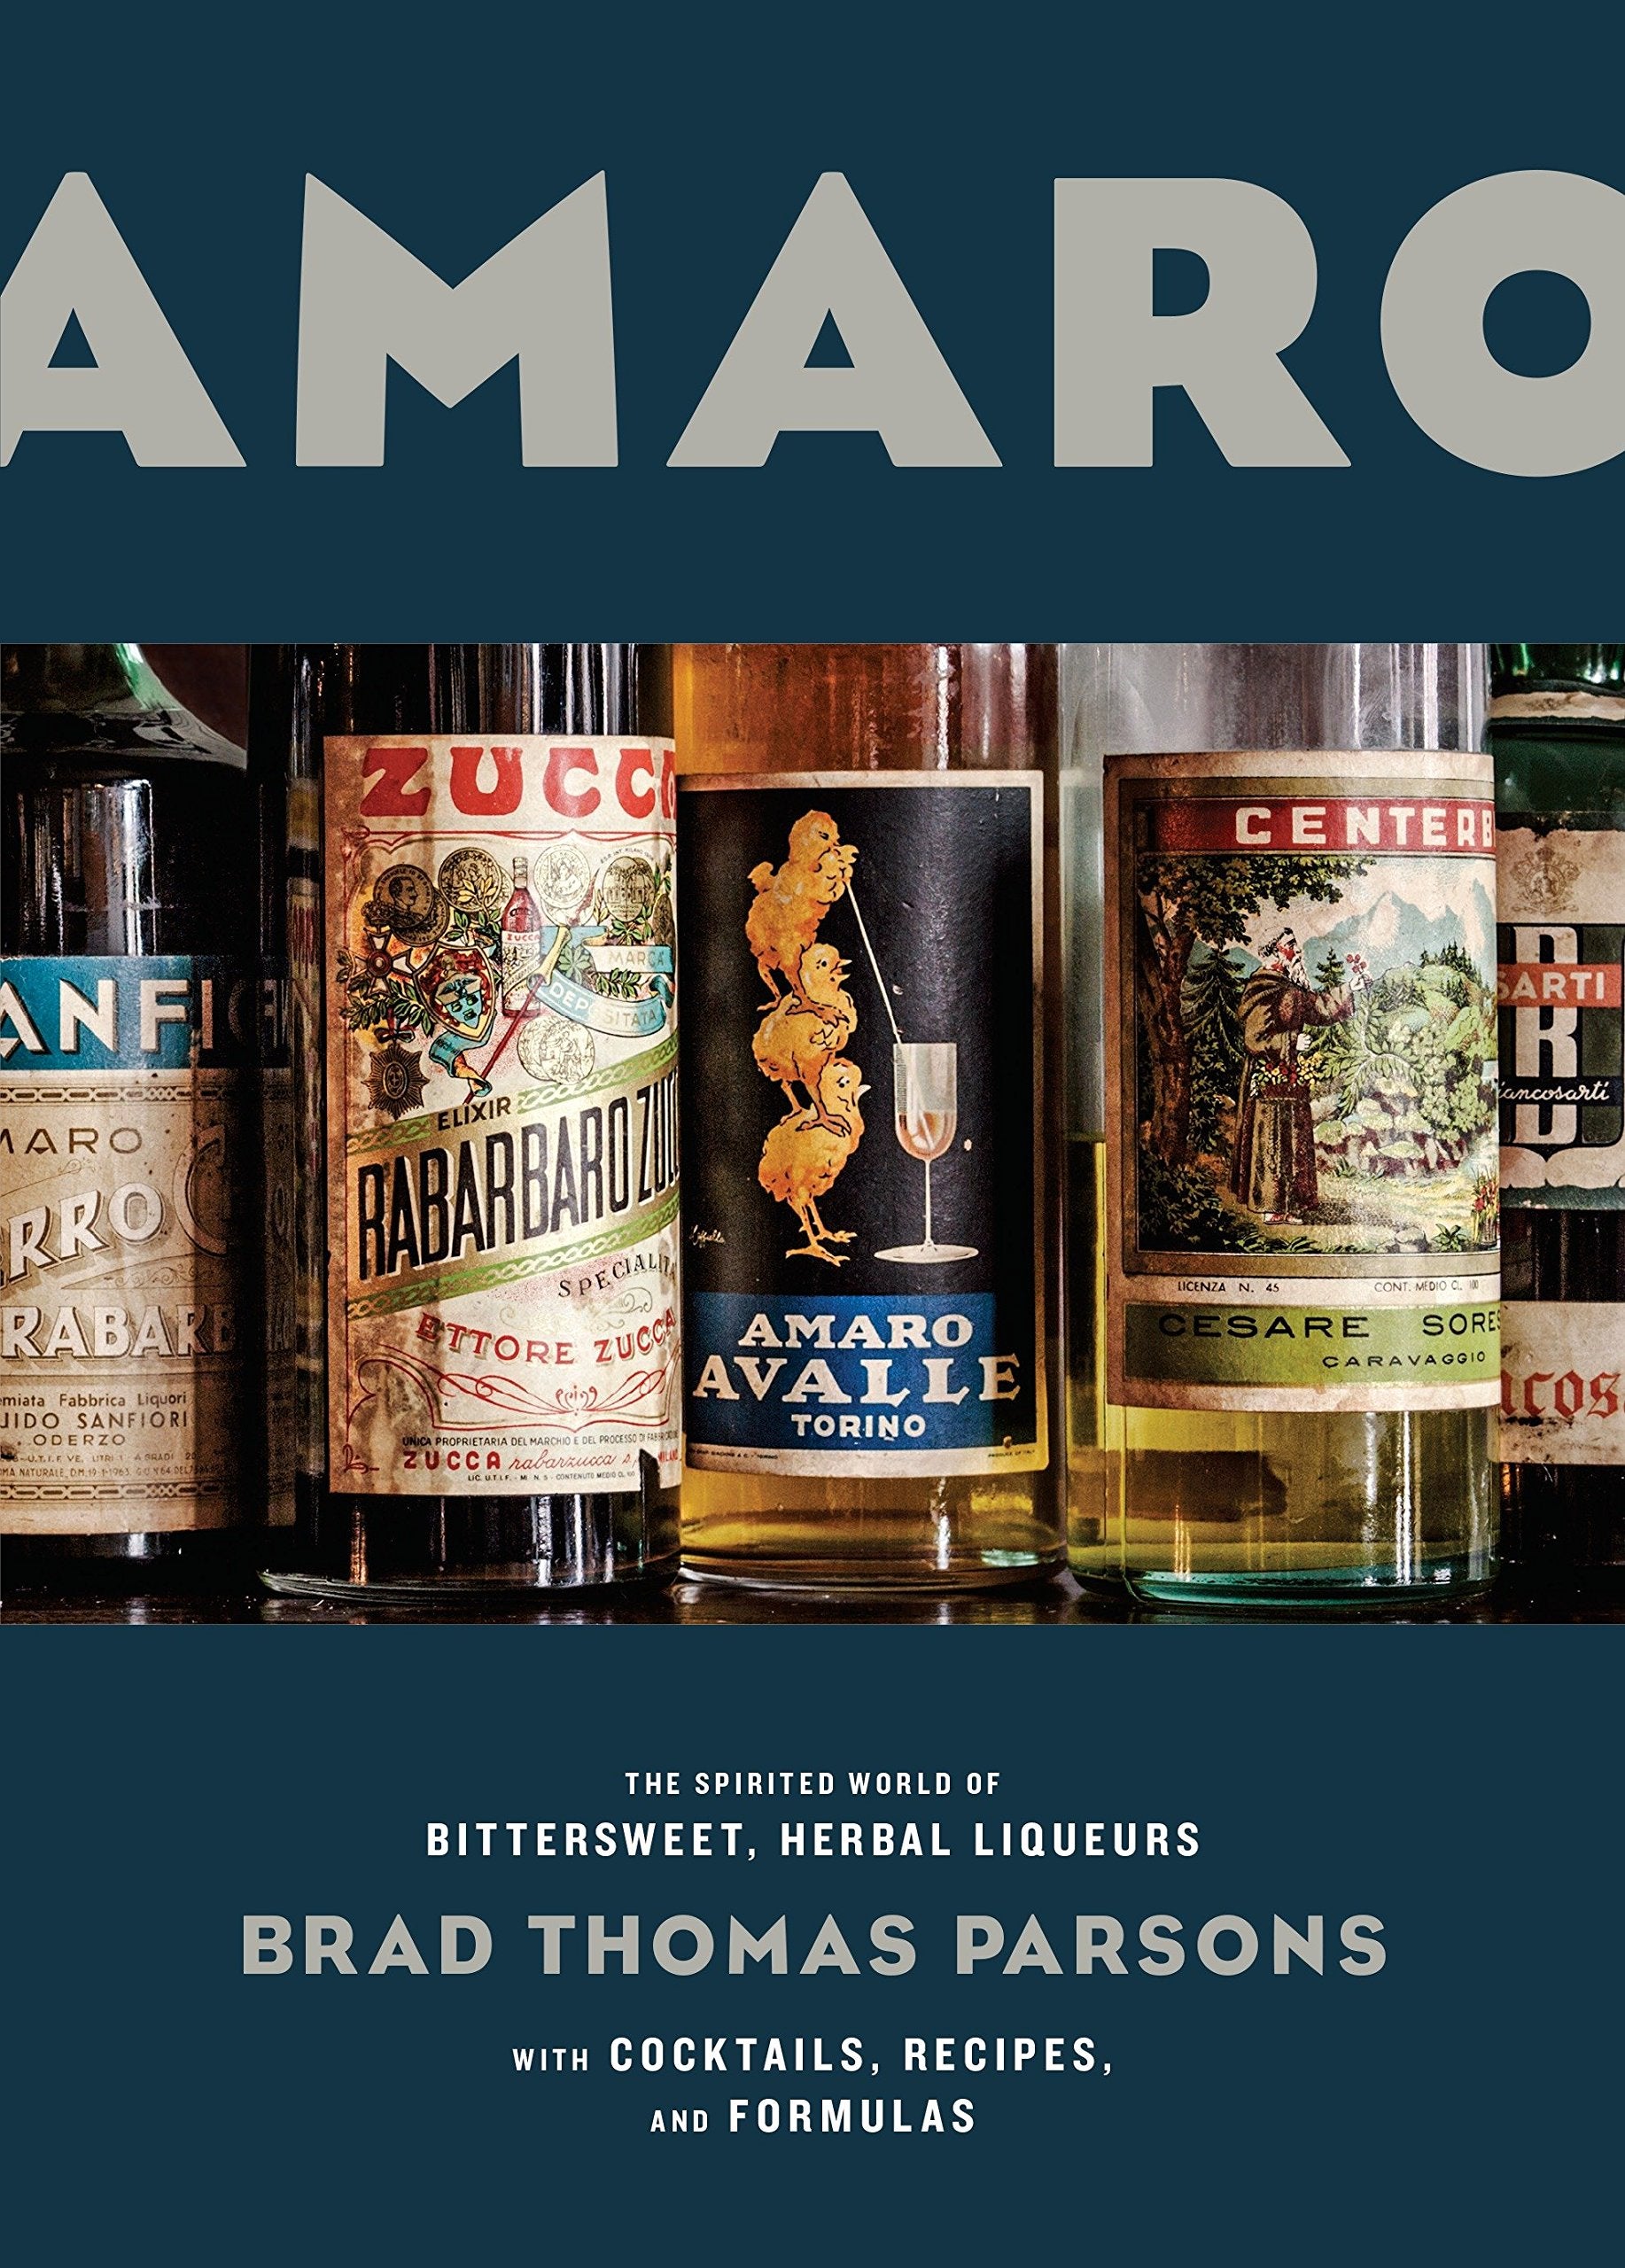 Amaro: The Spirited World of Bittersweet, Herbal Liqueurs, with Cocktails, Recipes, and Formulas (Brad Thomas Parsons) *Signed*